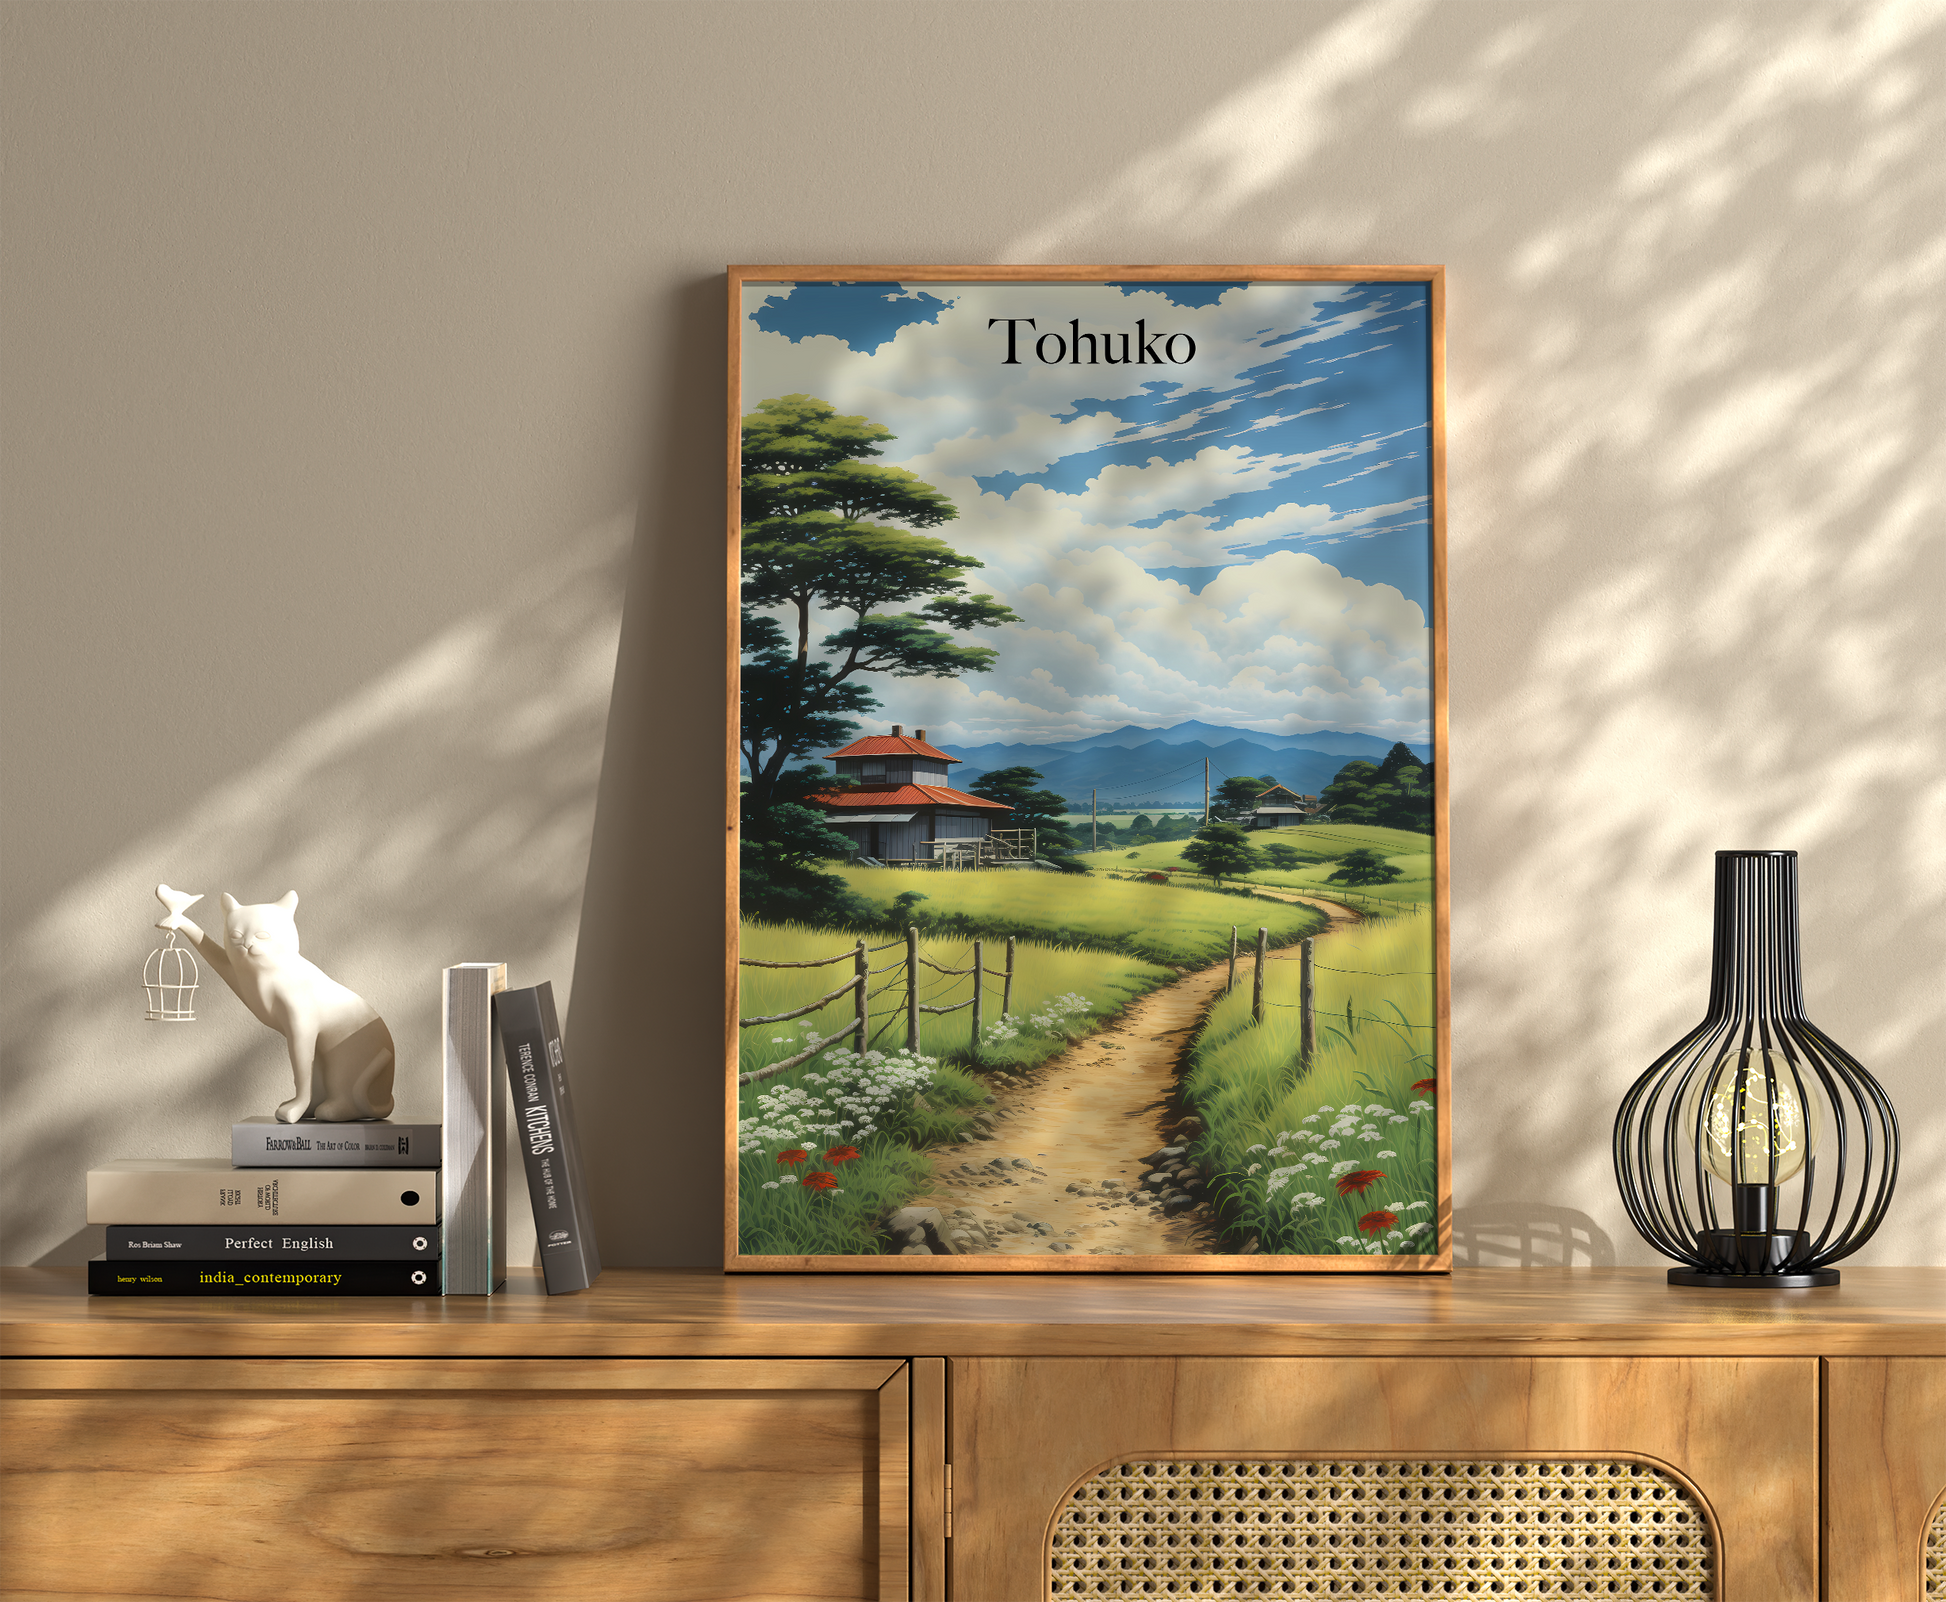 A framed travel poster of Tohoku with books and a vase on a wooden console.